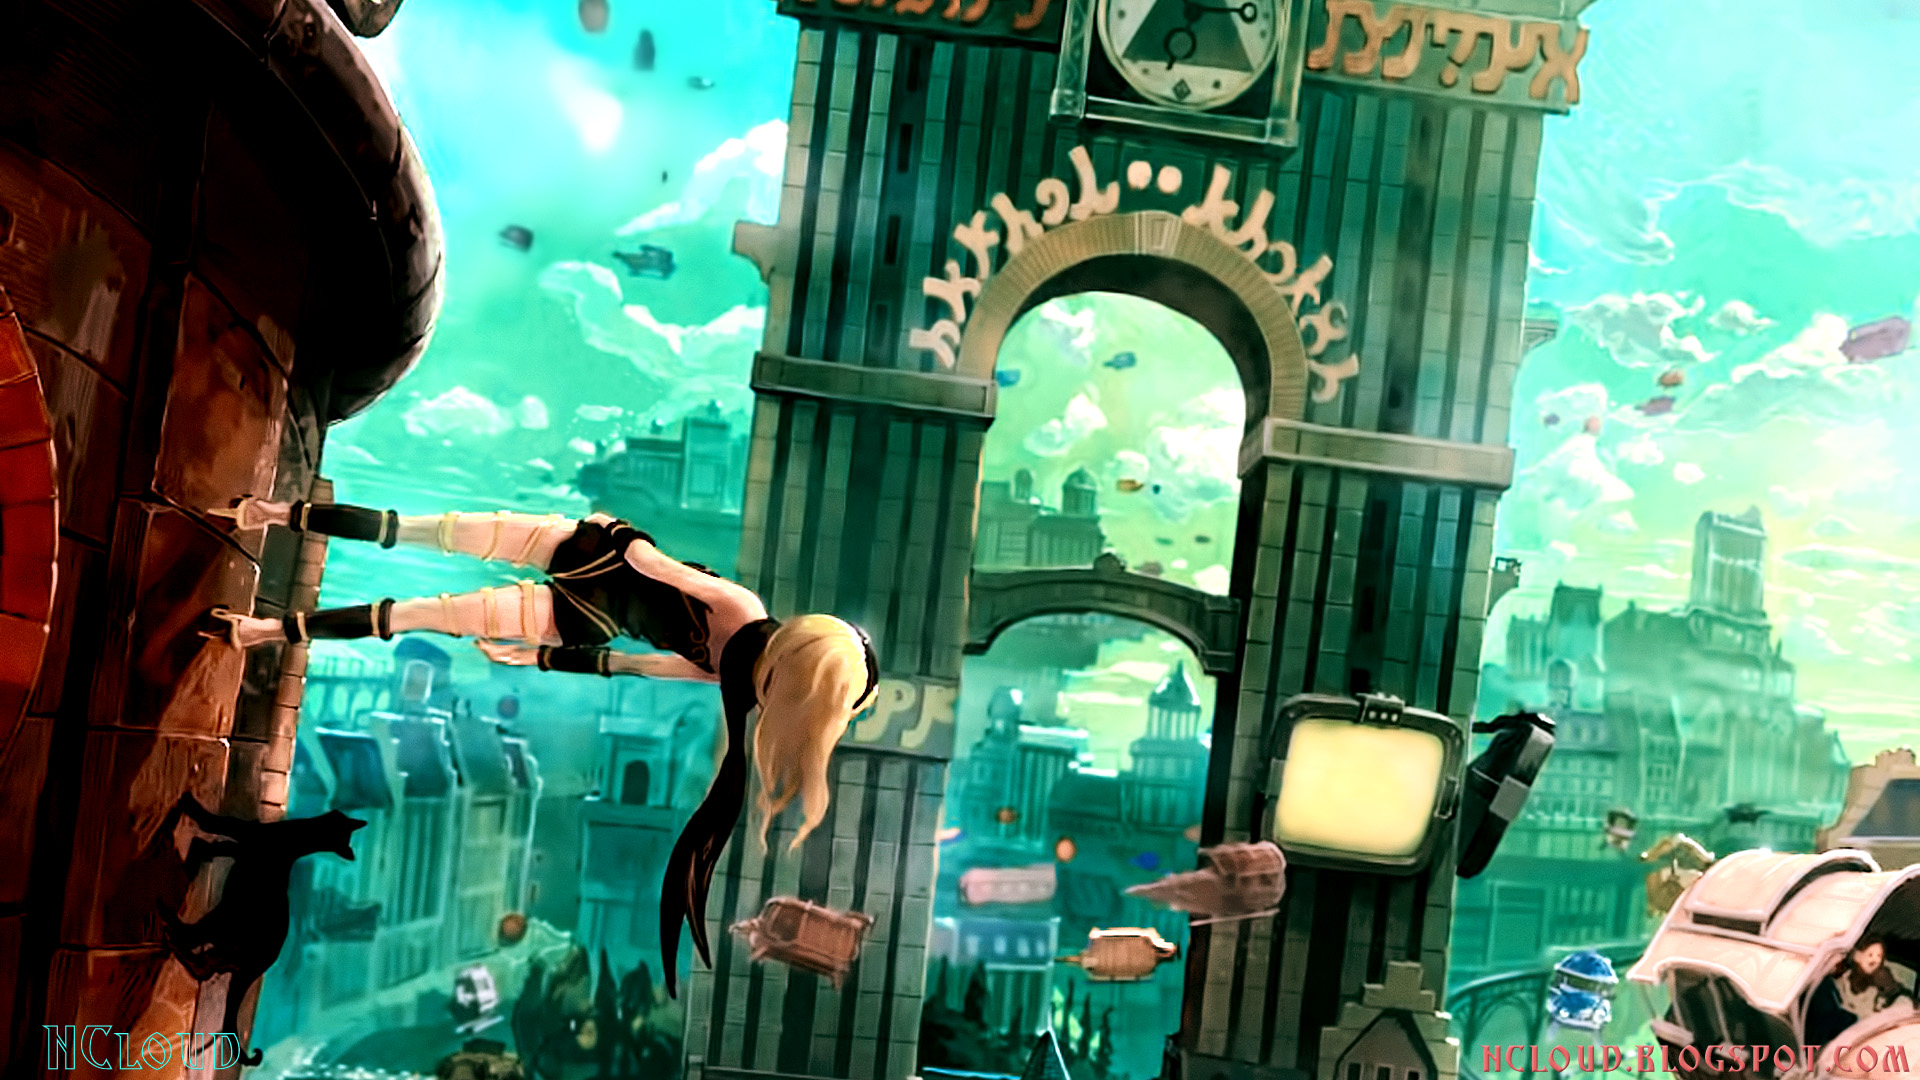 Free Download Gravity Rush Images Crazy Gallery 19x1080 For Your Desktop Mobile Tablet Explore 47 Gravity Wallpaper Gravity Falls Hd Wallpaper Gravity Falls Desktop Wallpaper Gravity Falls Wallpapers 1080p